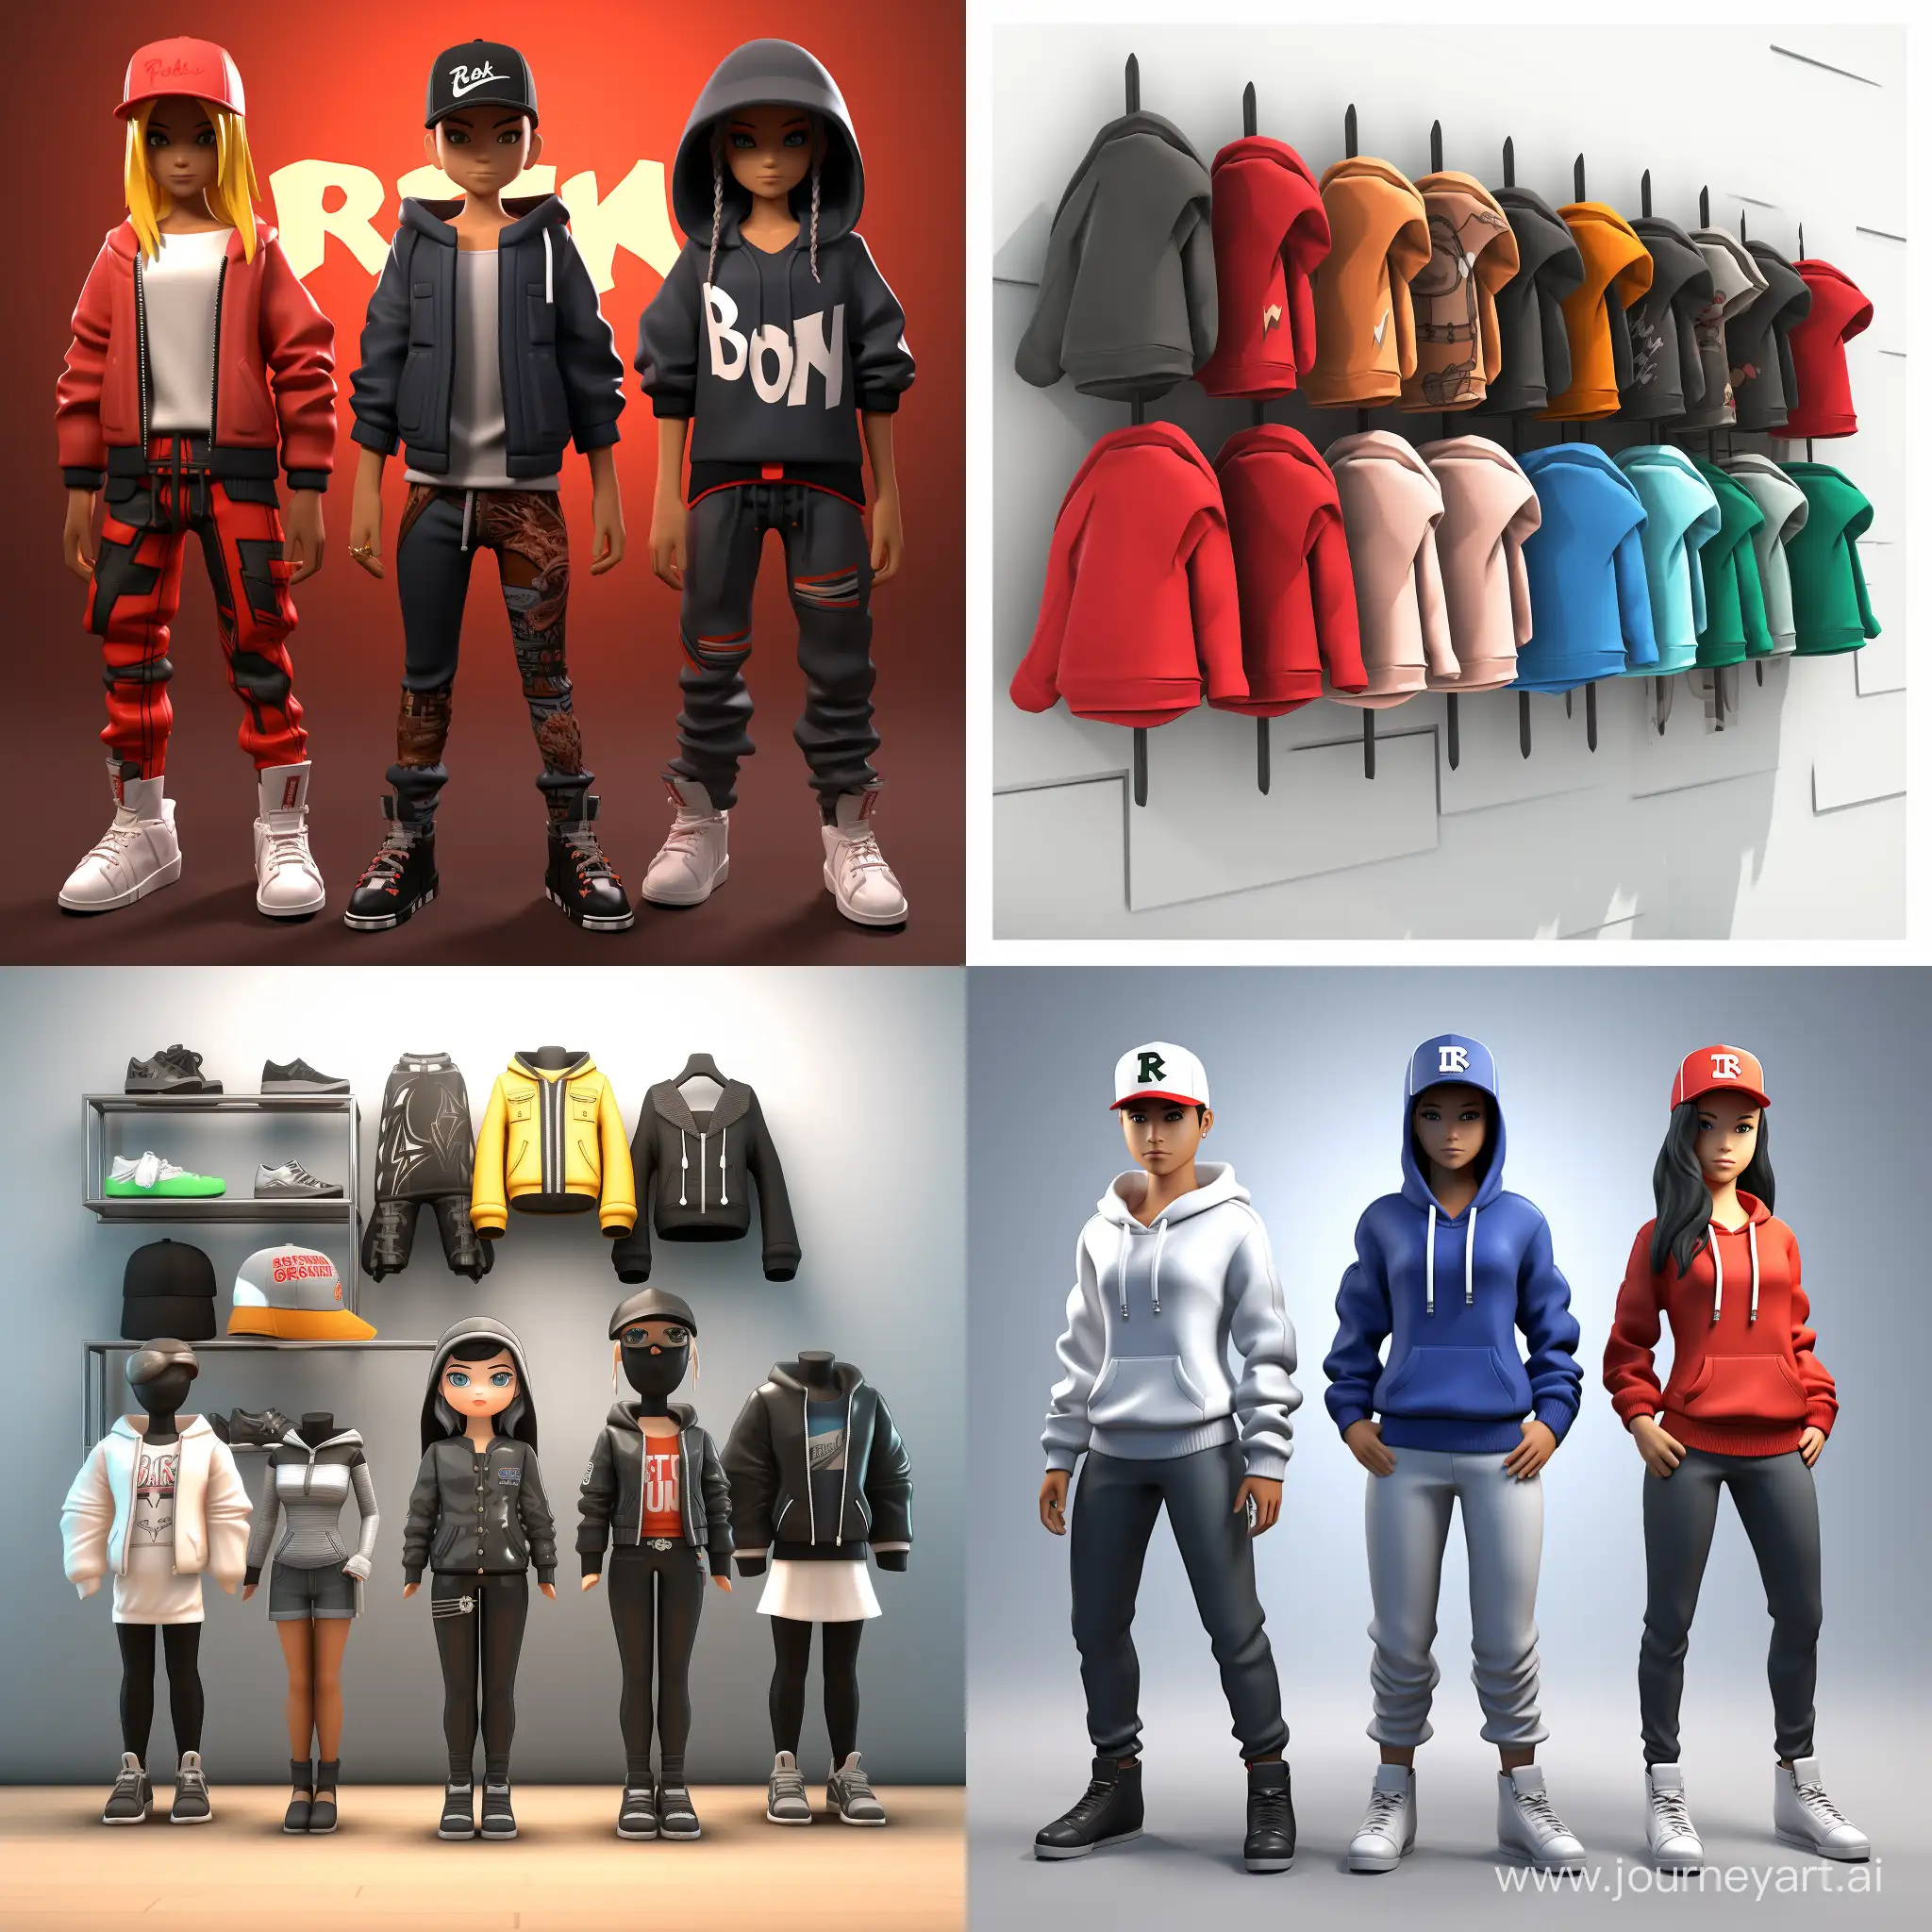 make 3 to 9 custom roblox clothes in any style